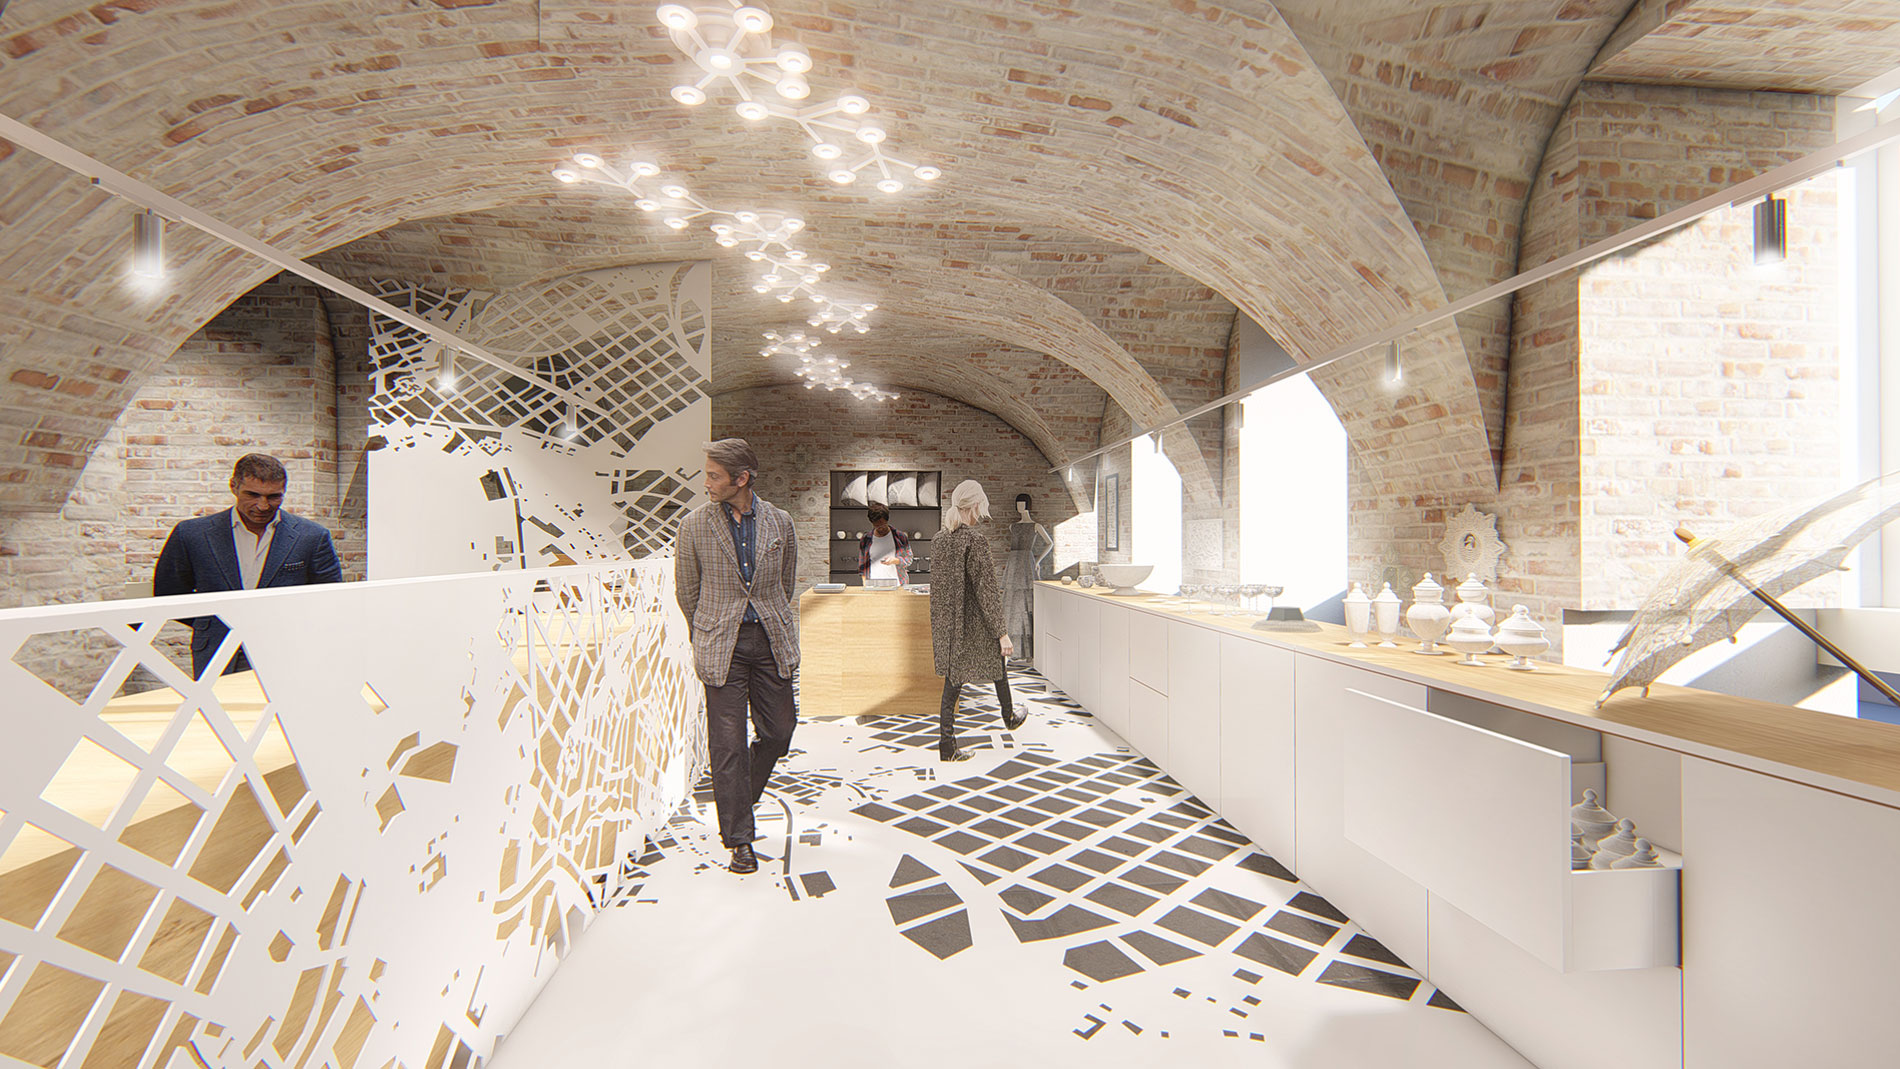 Plauen Lace Museum - Design and manufacturing for the visitor centre by Motor Agency